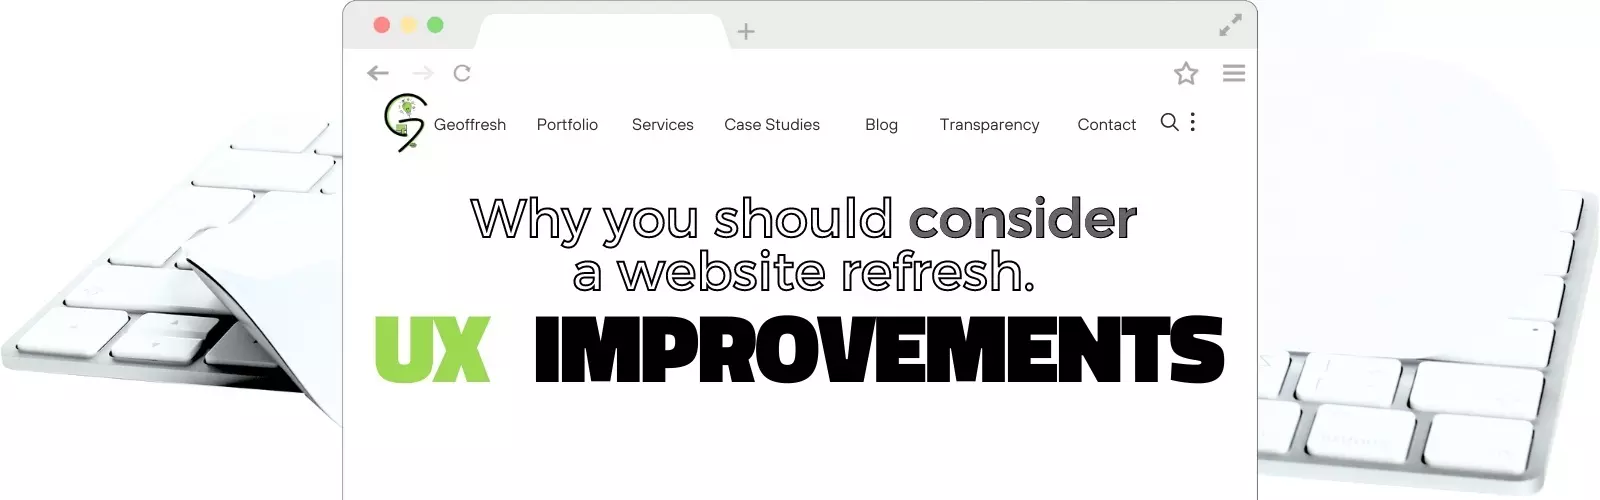 User Experience Improvements to Make During a Website Refresh